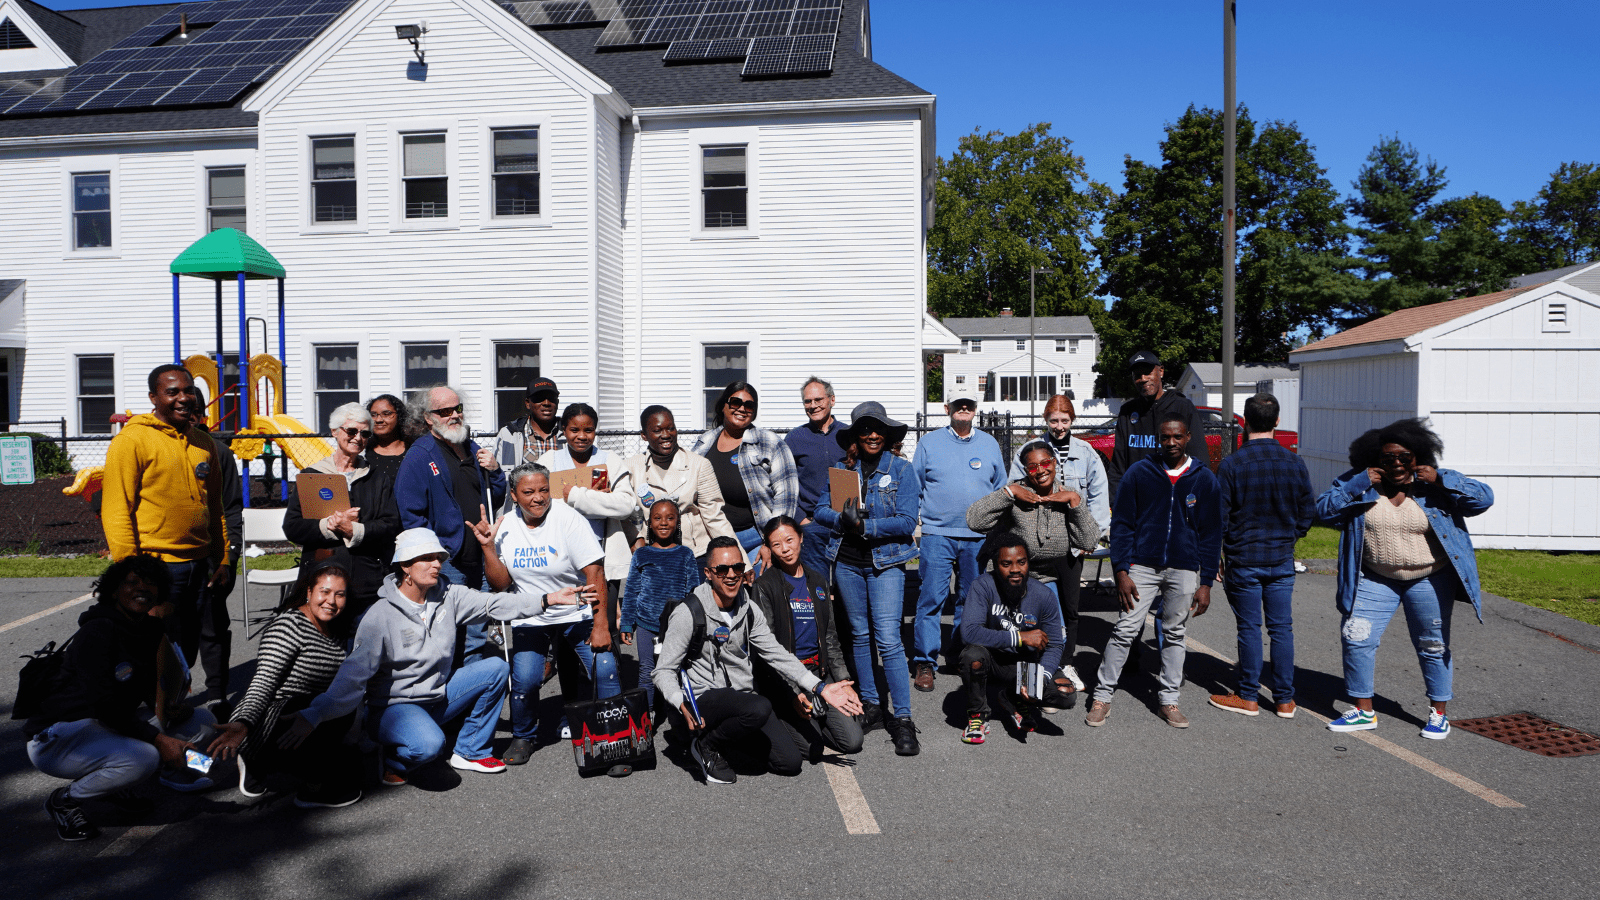 Volunteers with Massachusetts Voter Table and their partners pose before canvassing.